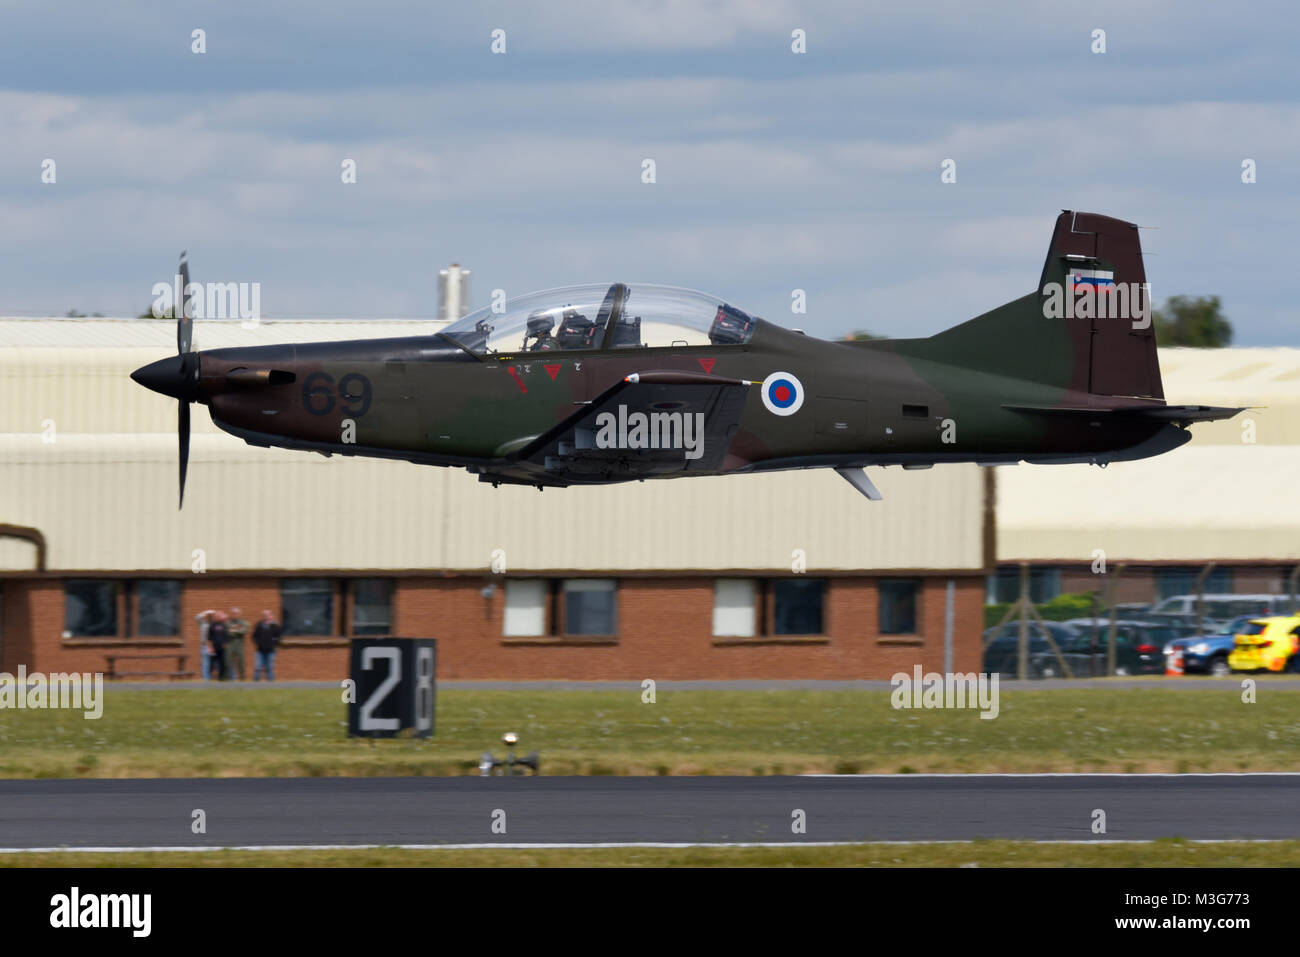 Slovenian Air Force Pilatus PC-9M ground attack aircraft taking off at the RAF Fairford Royal International Air Tattoo. Keeping low Stock Photo